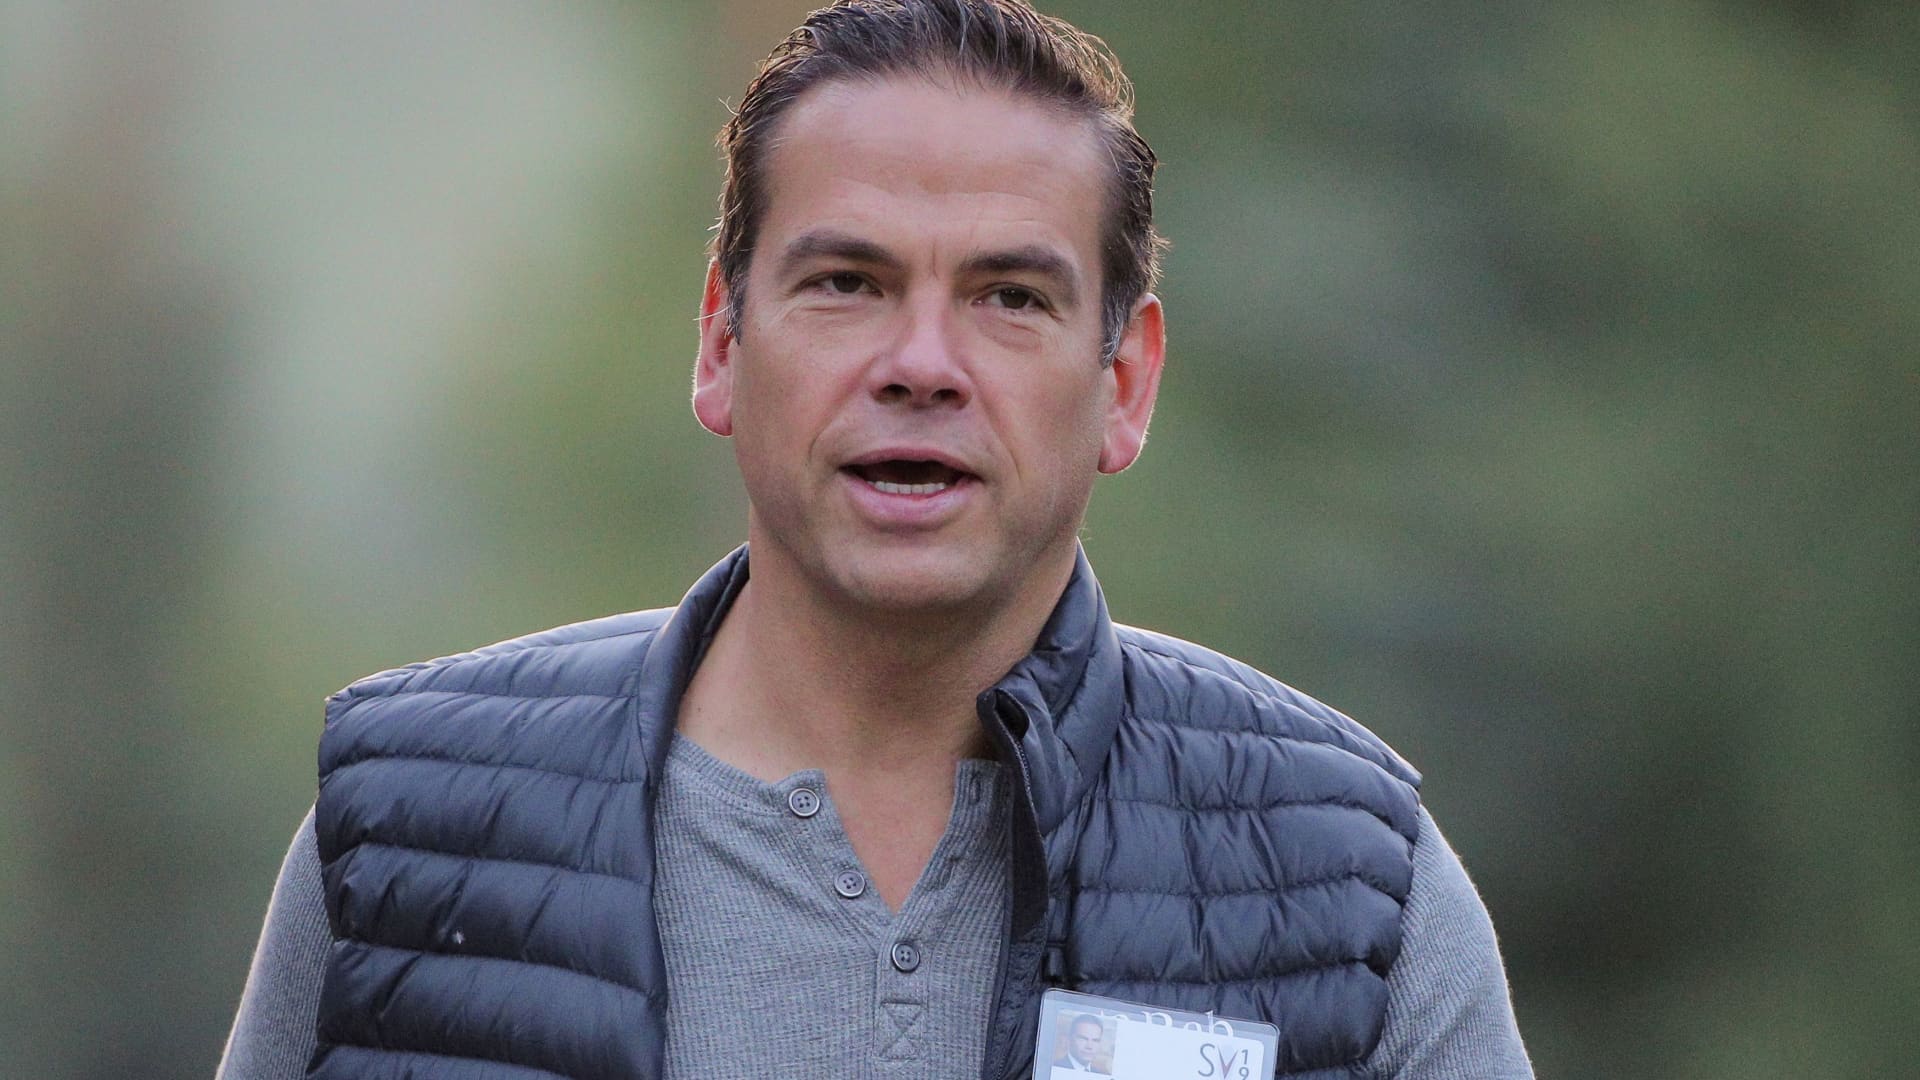 Fox CEO Lachlan Murdoch to face questioning as part of Dominion Voting’s .6 billion lawsuit